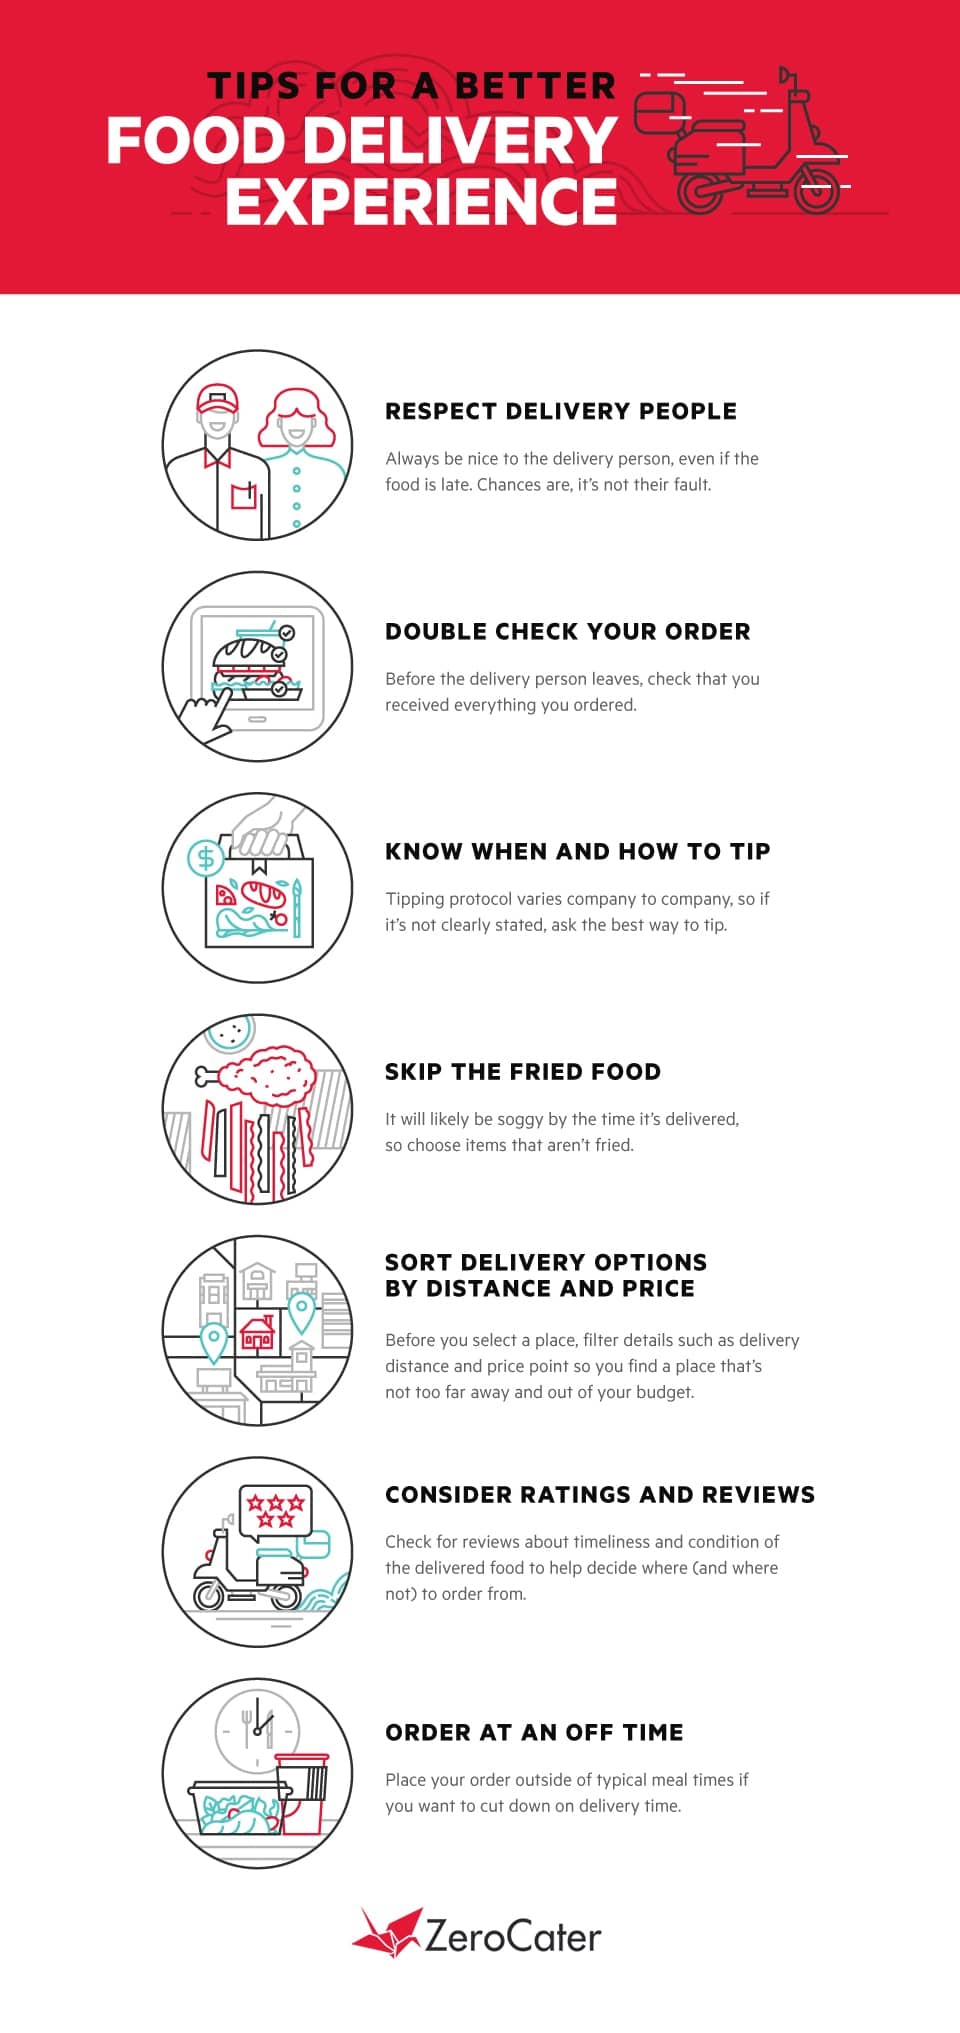 Tips for a Better Food Delivery Experience InfoGraphic